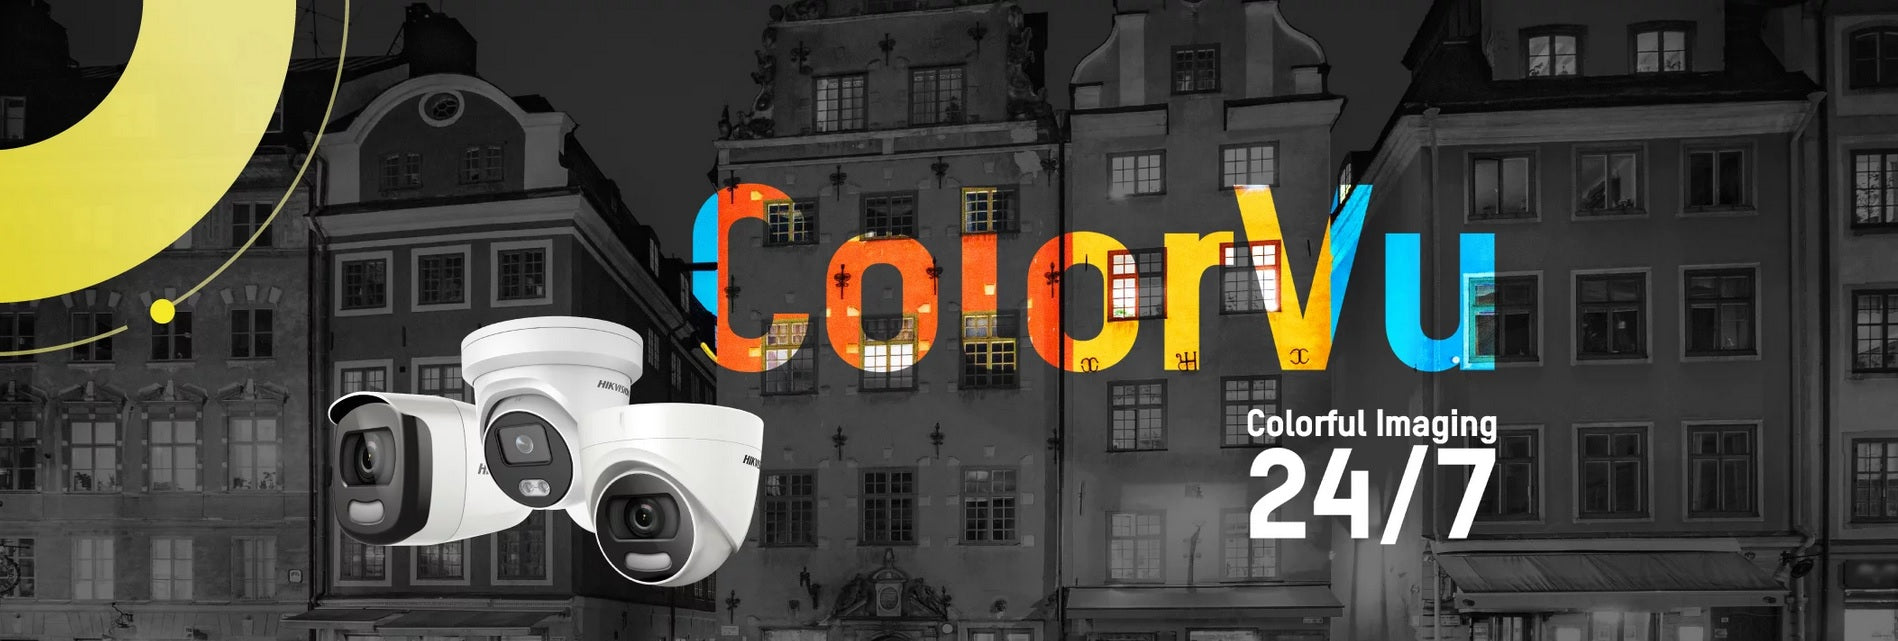 Enhance Your Security with ColorVu Technology Cameras